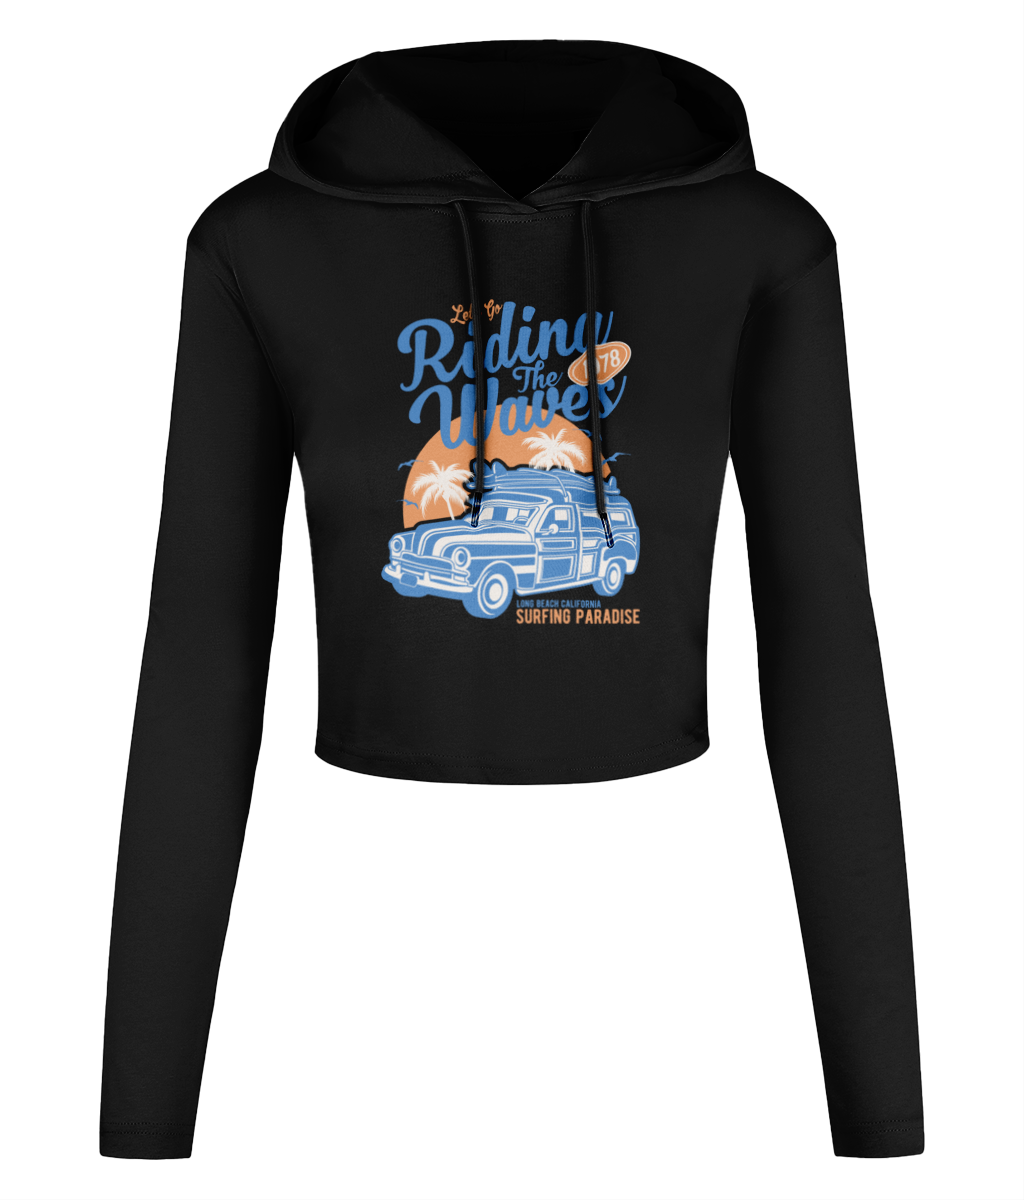 Riding The Waves – Women’s Cropped Hooded T-shirt